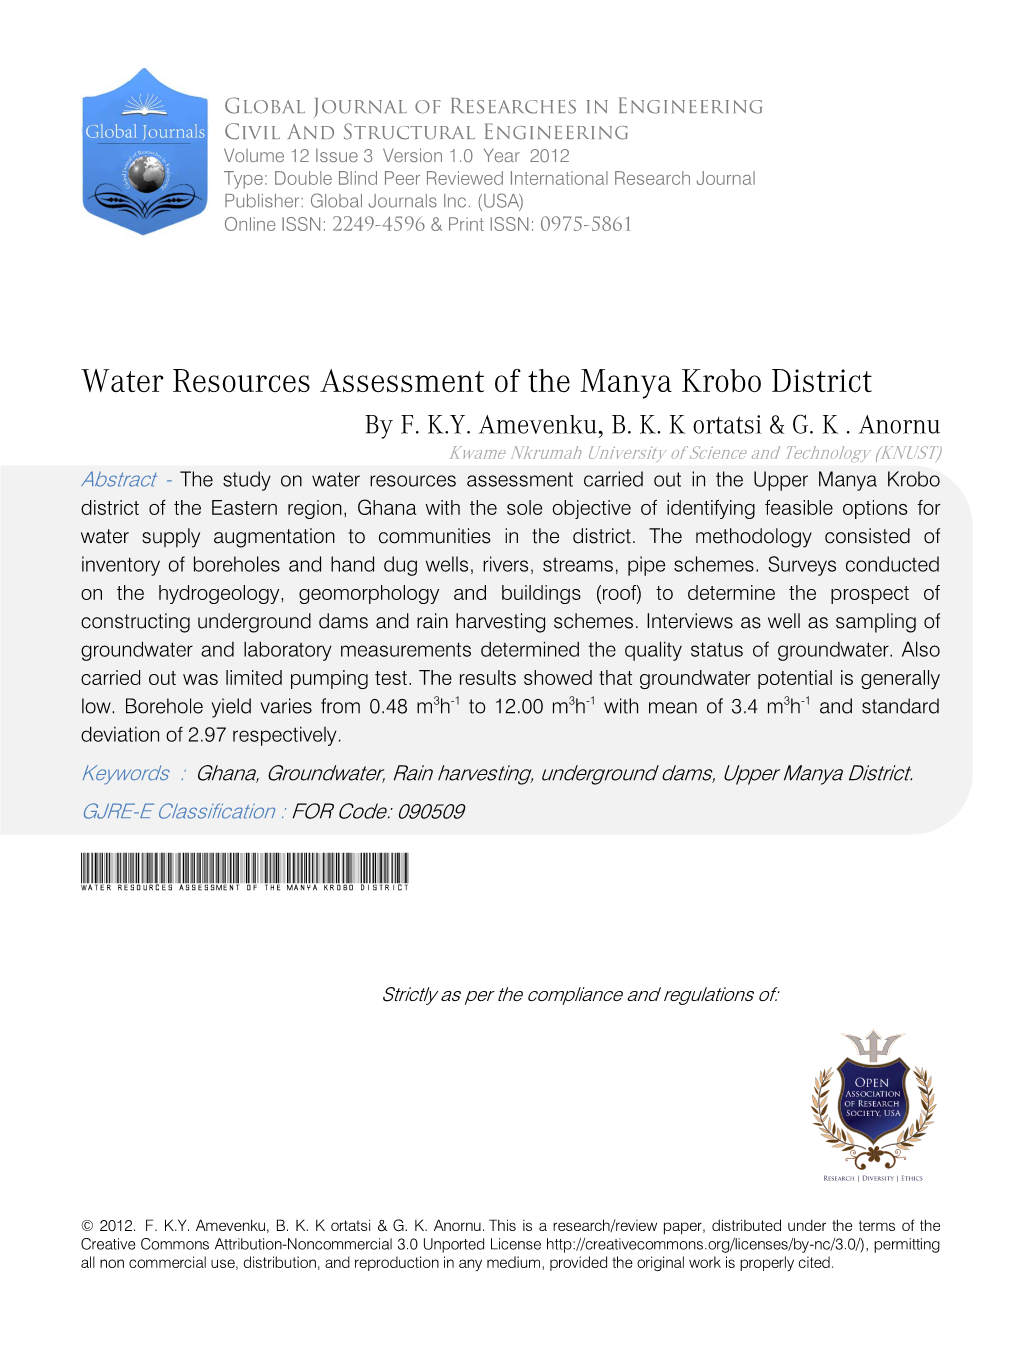 Water Resources Assessment of the Manya Krobo District by F